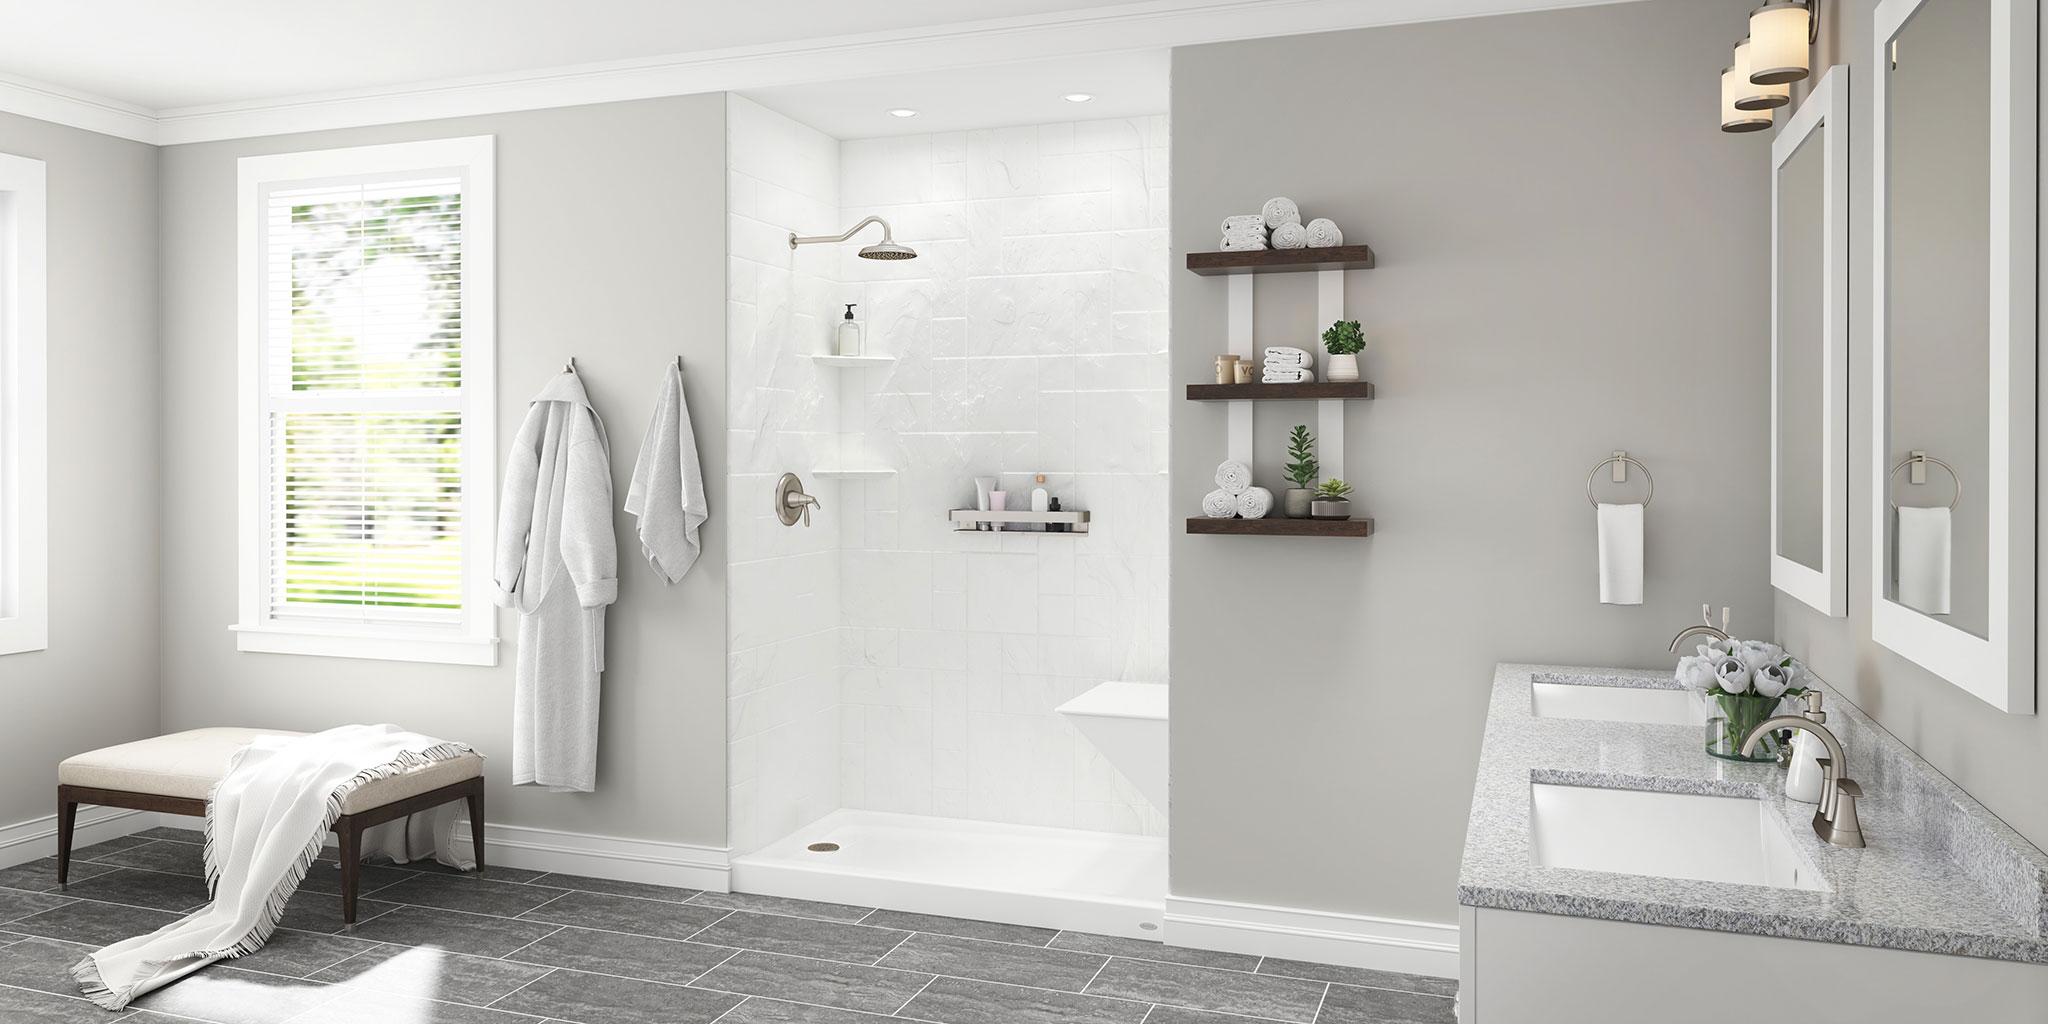 What is the Best Time of Year to Remodel a Bathroom?